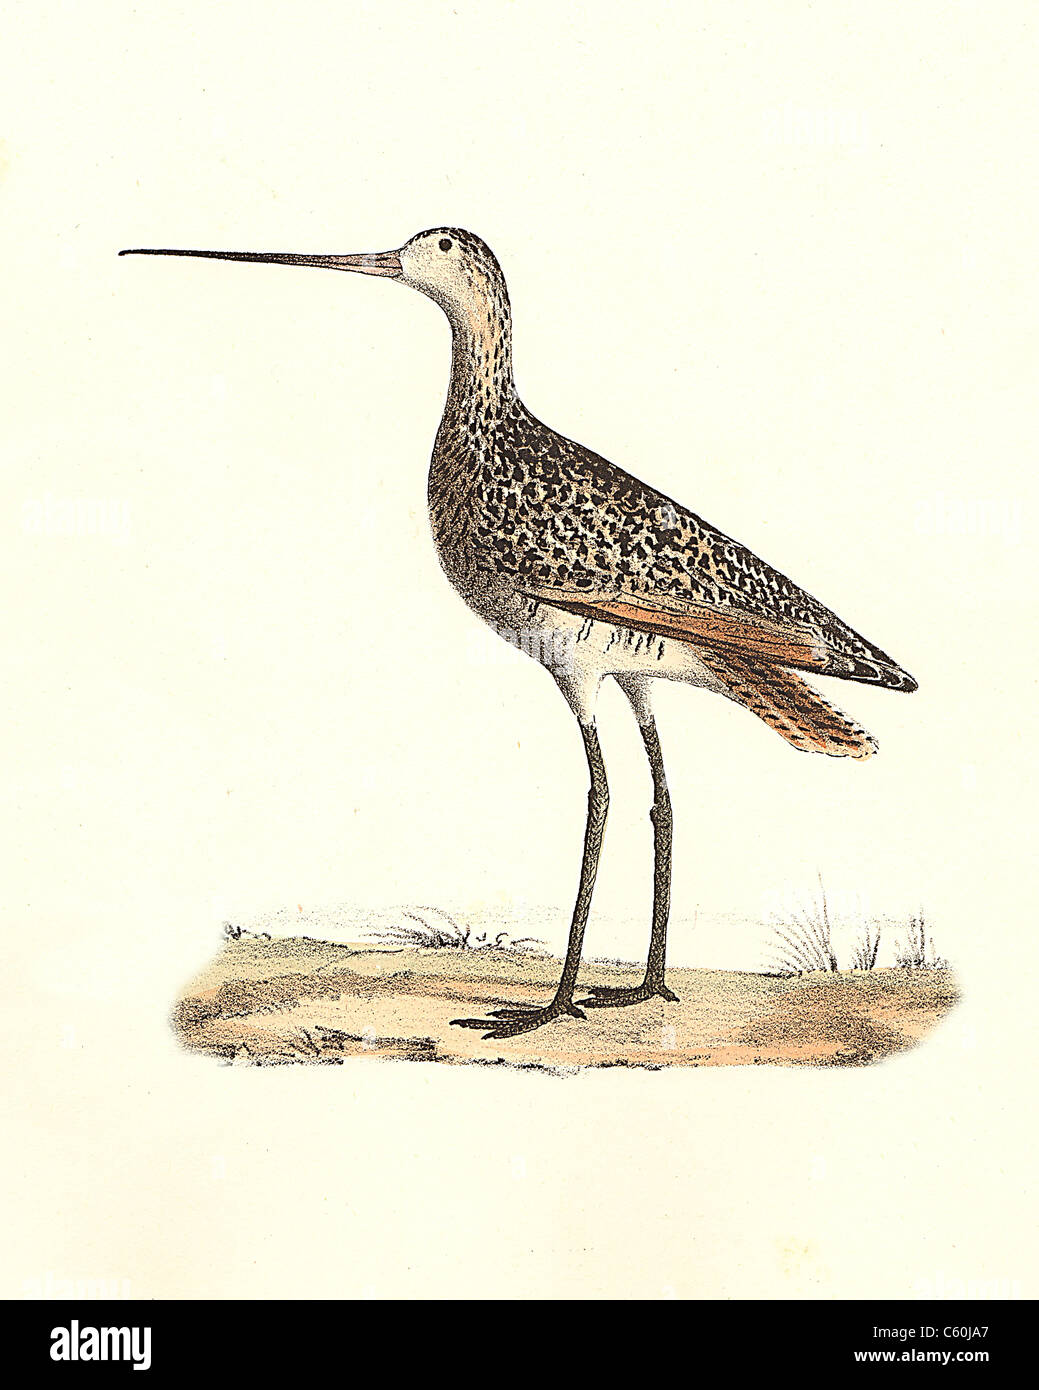 The Marlin, or Marbled Godwit (Limosa fedoa) vintage bird lithograph - James De Kay, Zoology of New York, or the New-York Fauna, Part II, Birds Stock Photo